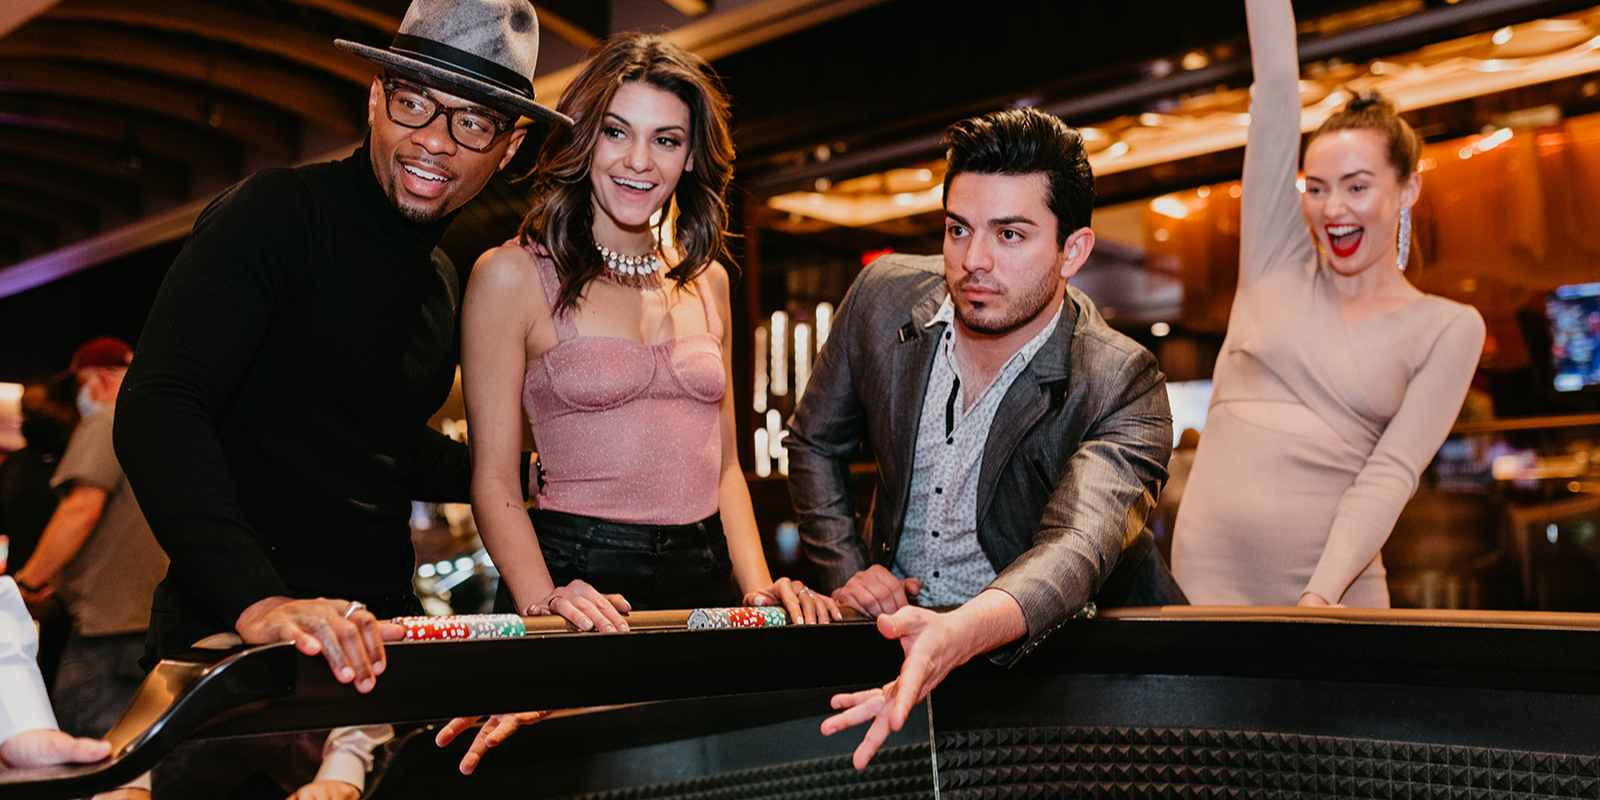 Four people standing around a craps table. One guy is throwing his dice to play while his 3 friends watch. One girl is celebrating with her right arm raised to the roof. Night time casino vibes.